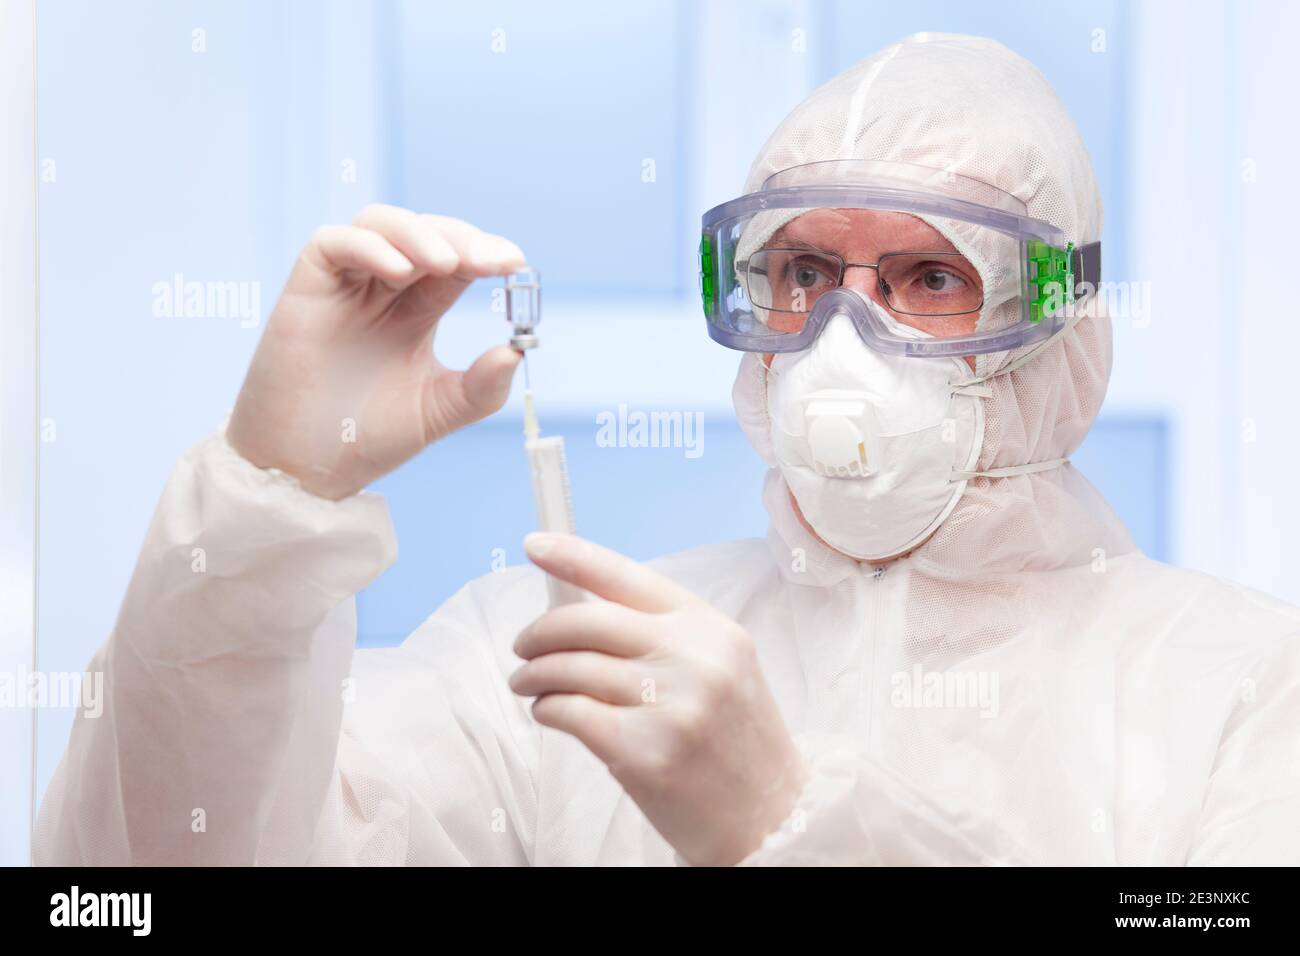 Doctor in white protective clothing and medical mask preparing a syringe for vaccination against covid-19 - focus on the face Stock Photo